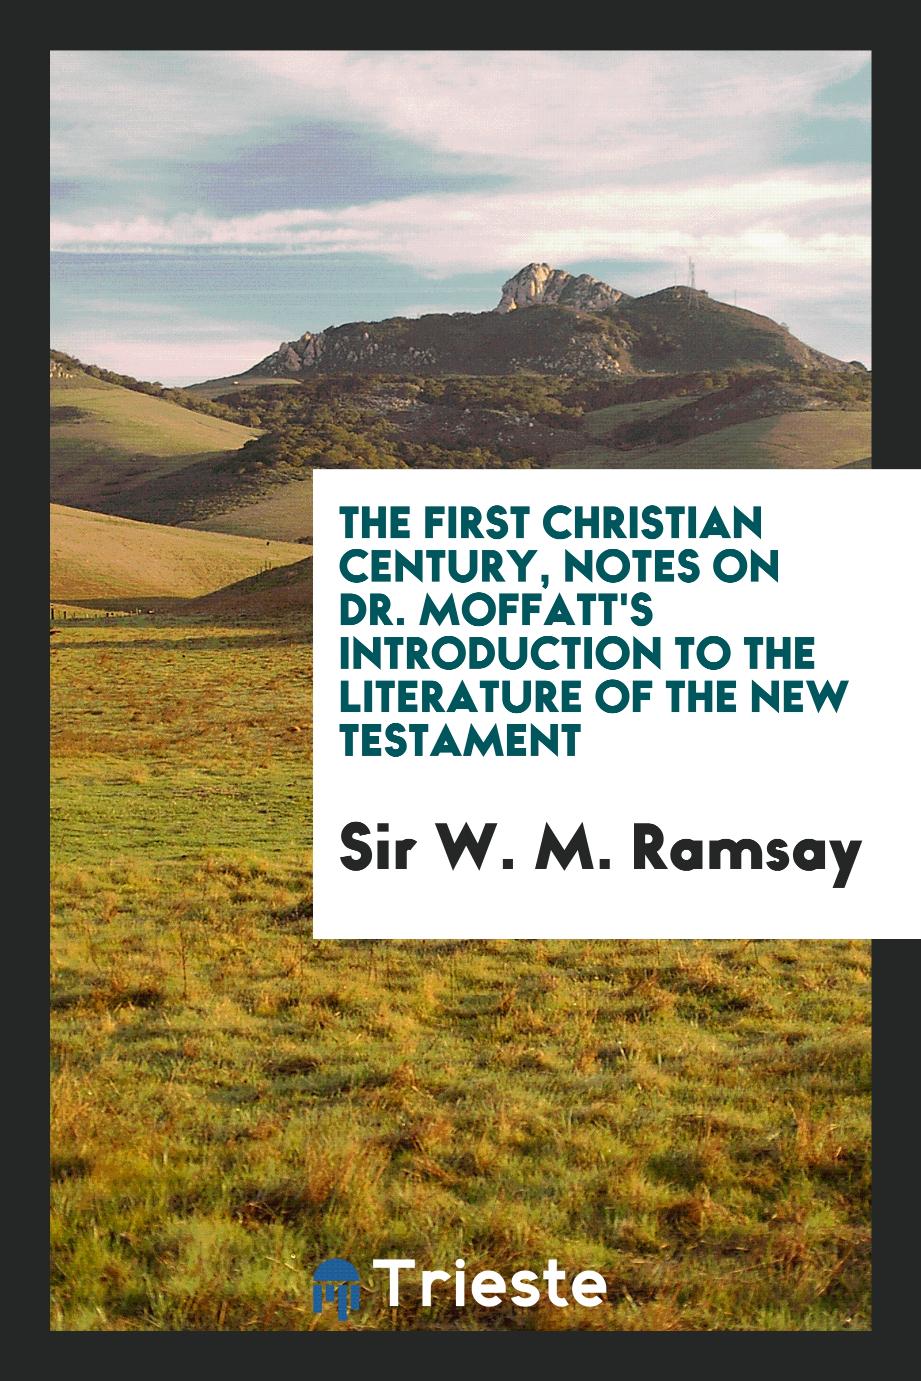 The first Christian century, notes on Dr. Moffatt's Introduction to the literature of the New Testament